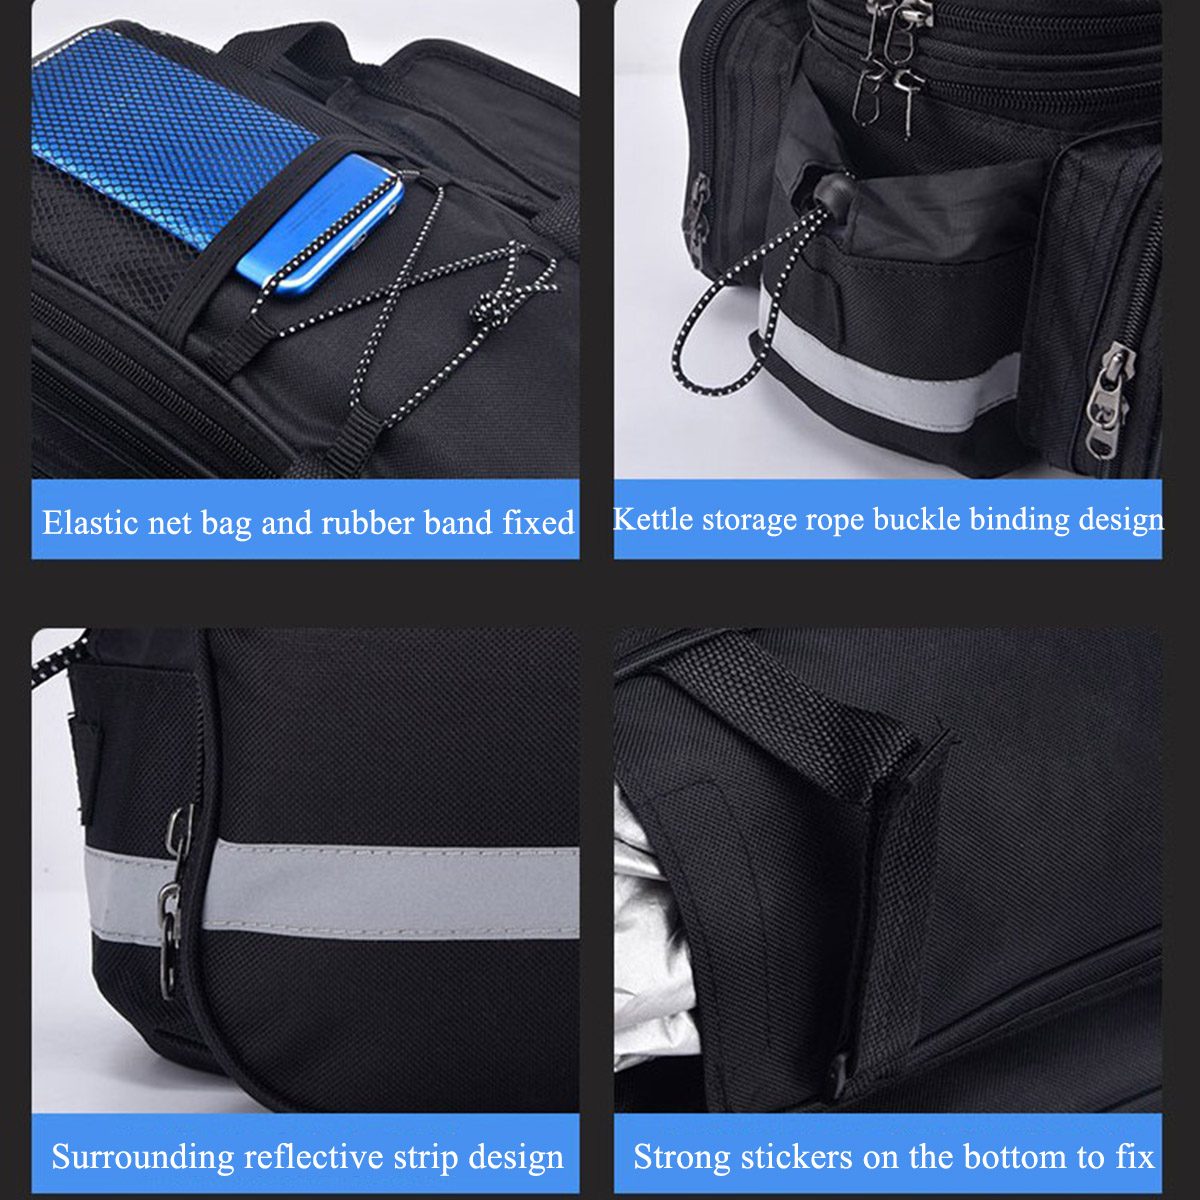 27L-Bicycle-Riding-Package-Large-Capacity-Waterproof-Reflective-Strips-Outdoor-Riding-Bag-1874551-8